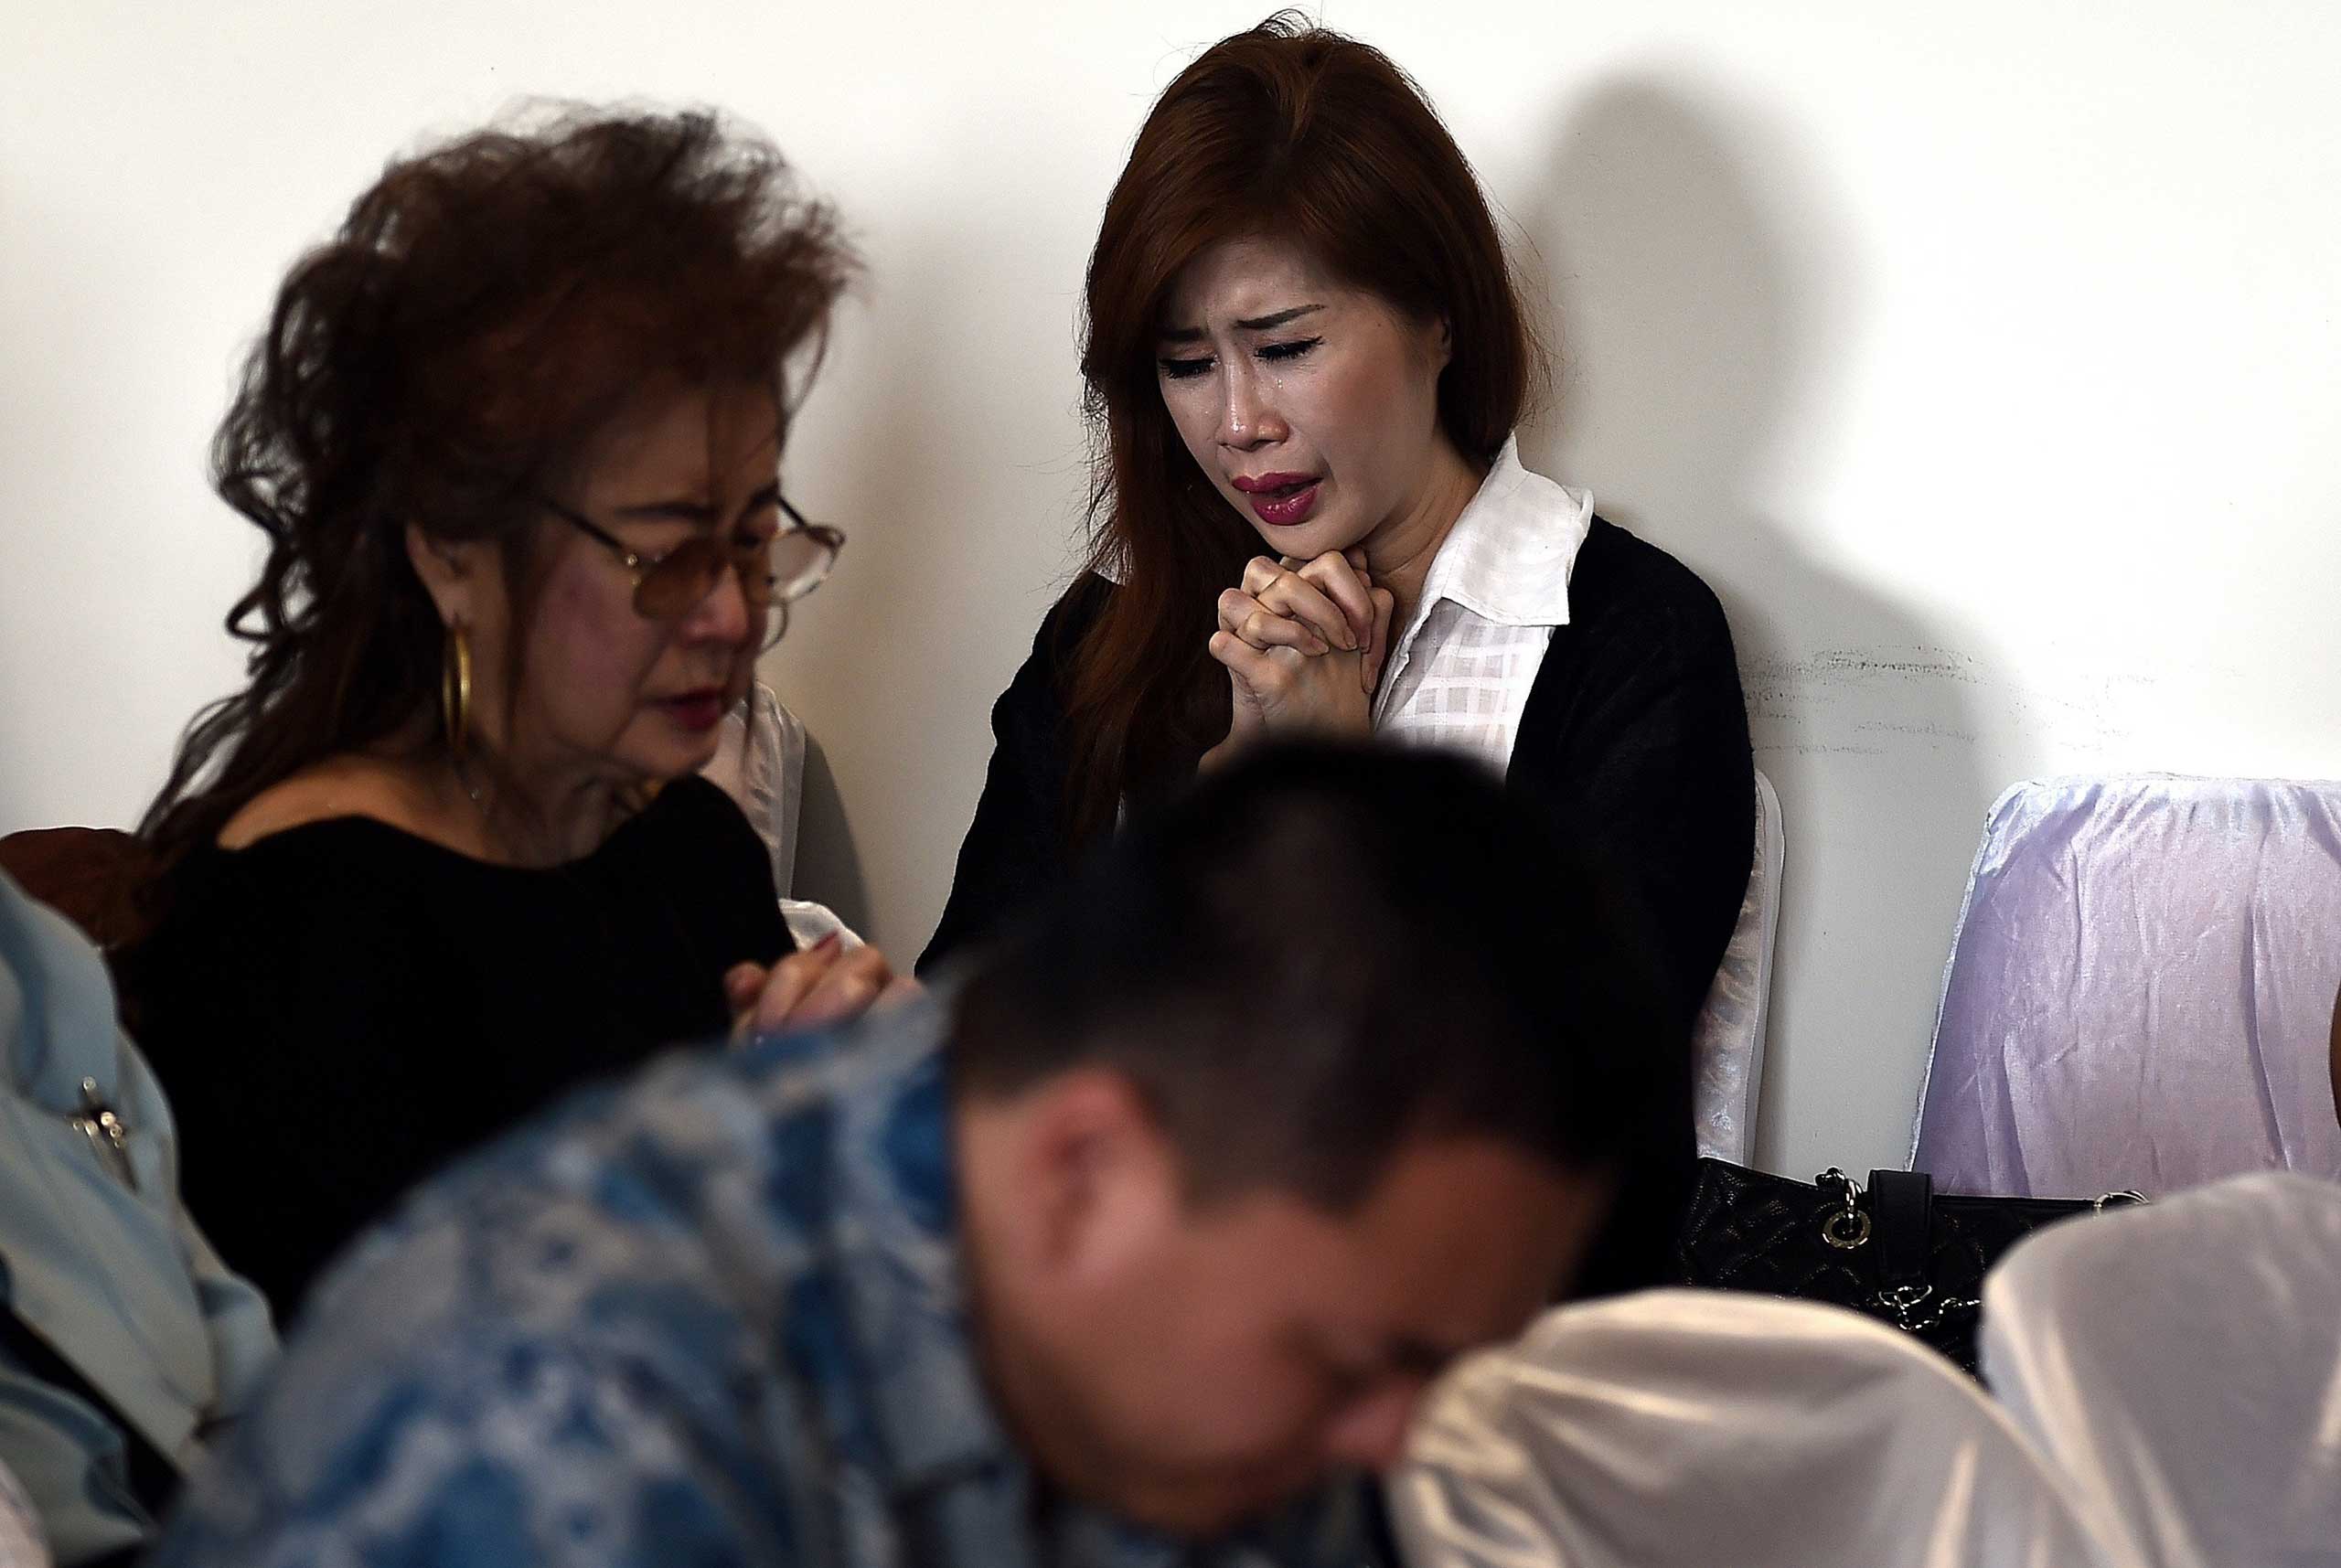 Family members of passengers onboard the missing AirAsia flight QZ8501 attend a briefing inside the crisis-centre at Juanda International Airport in Surabaya, Indonesia on Dec. 29, 2014.